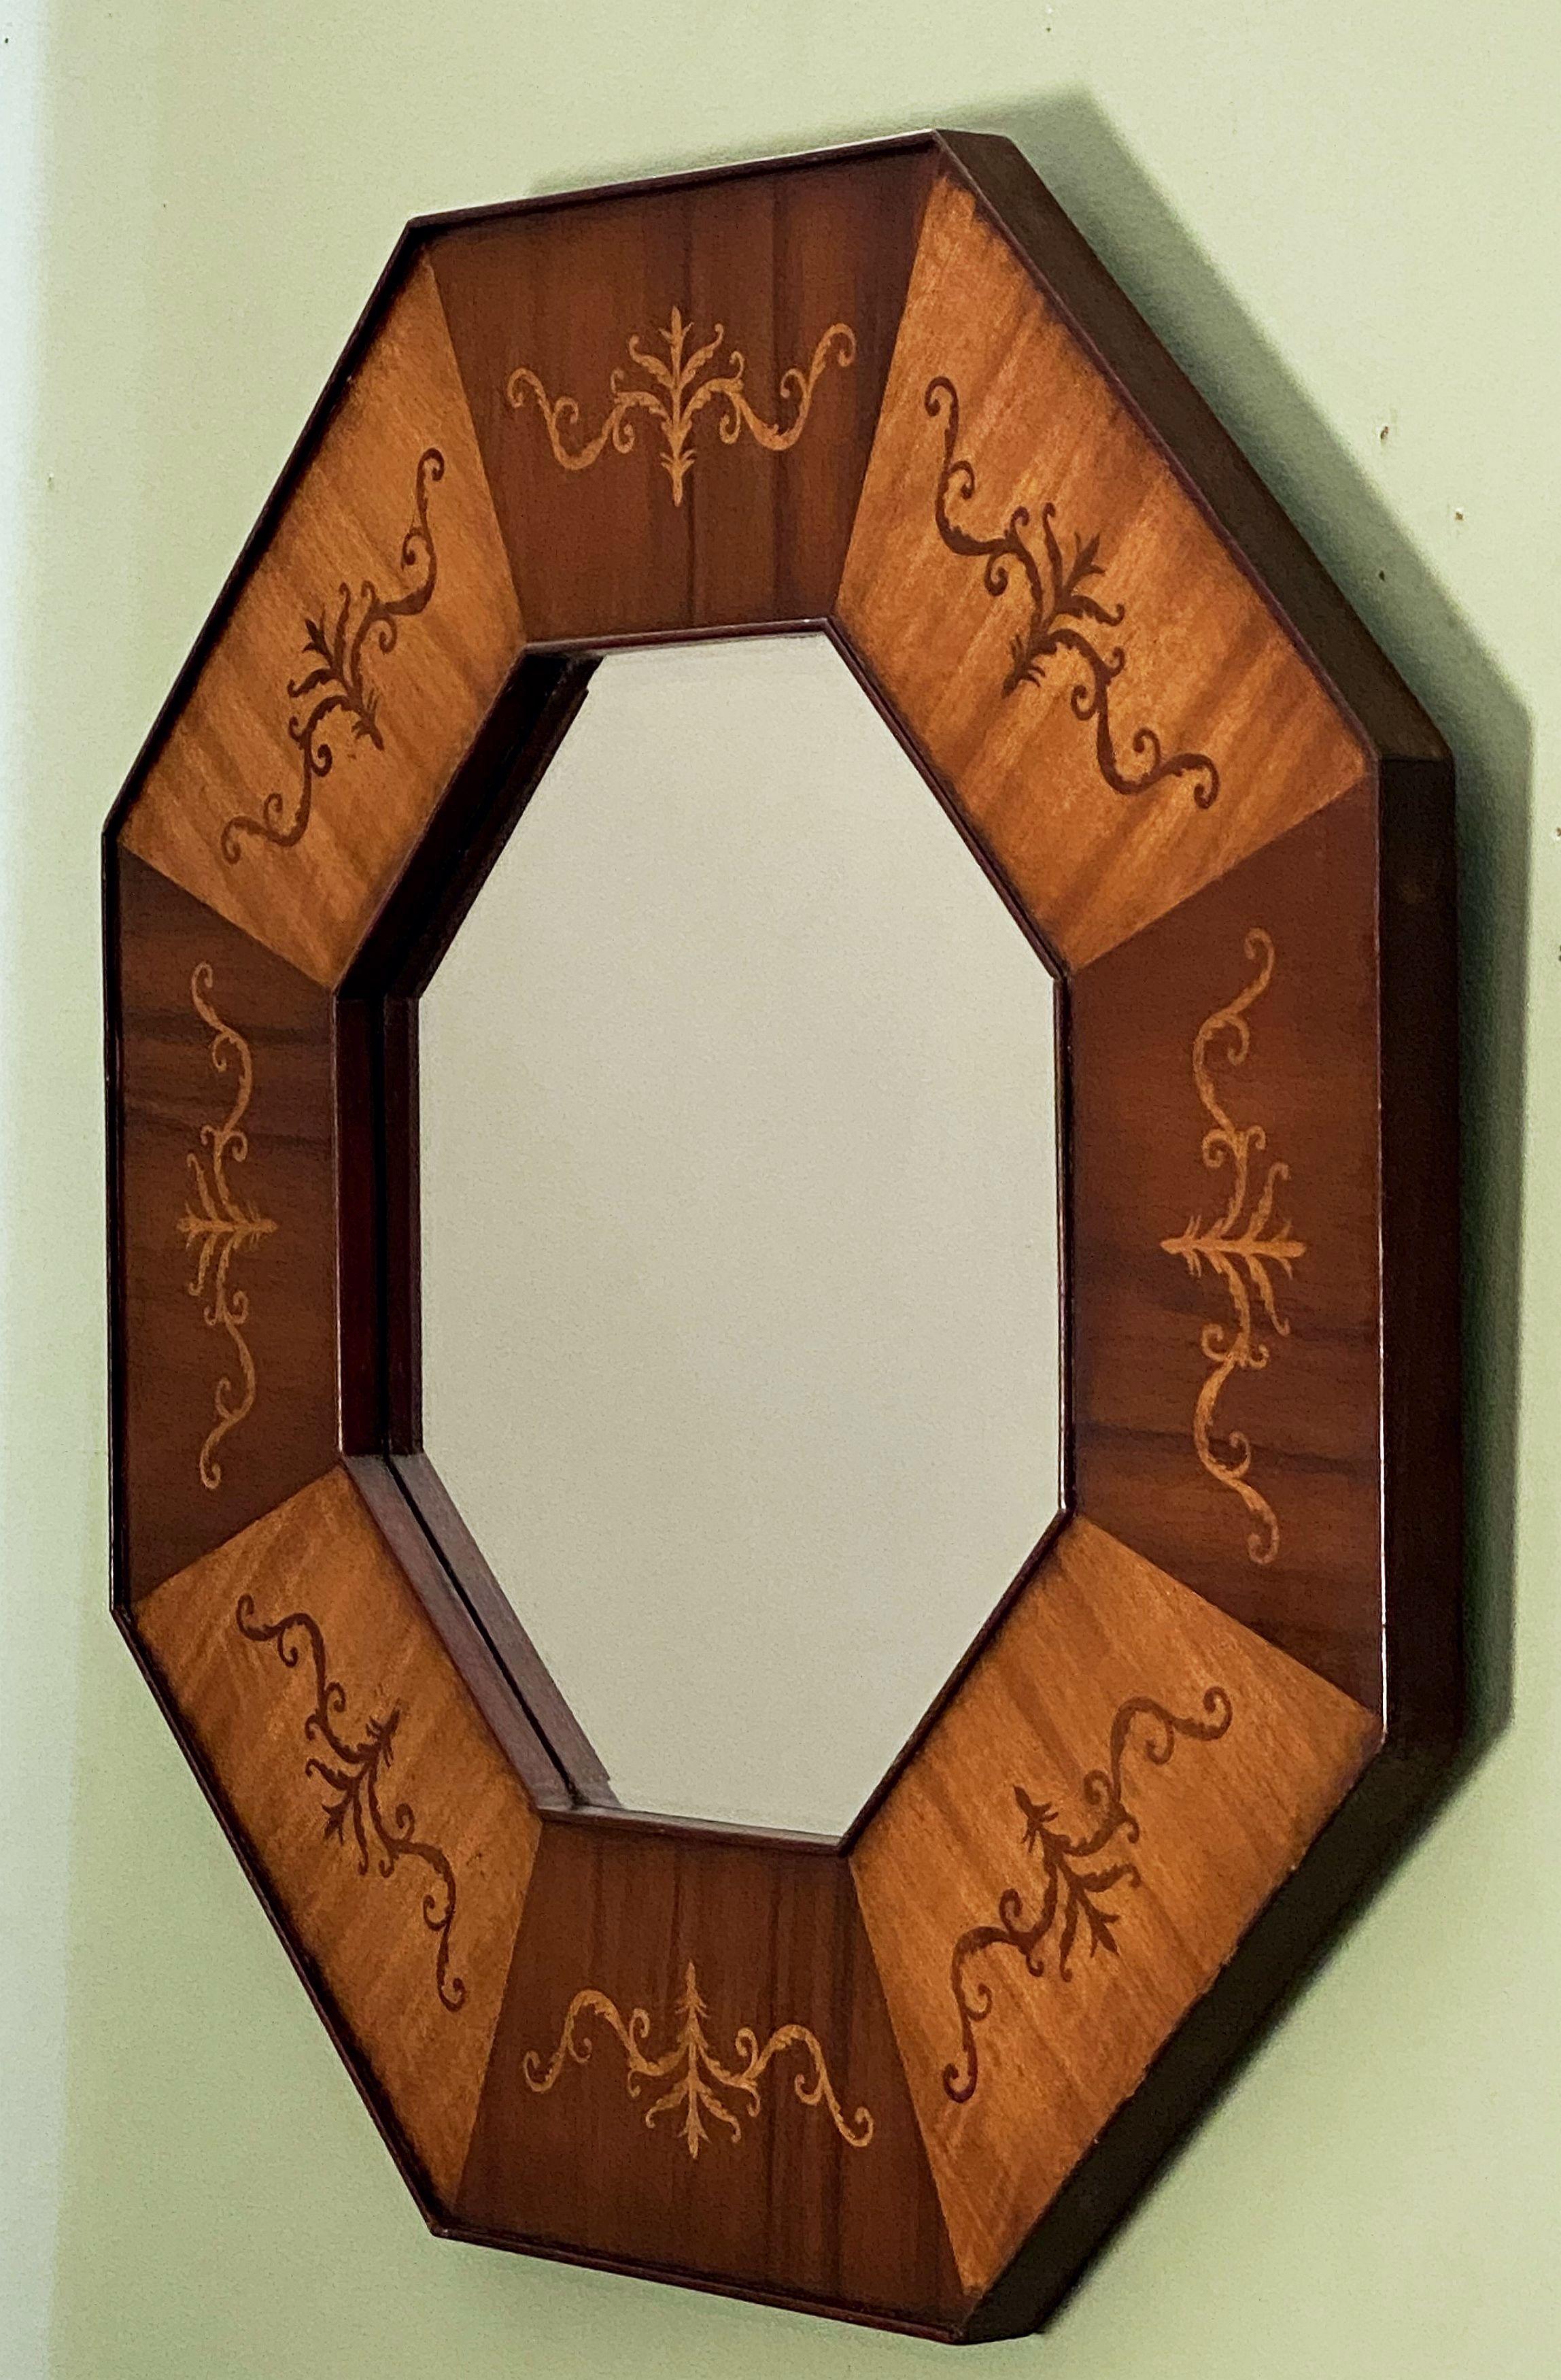 English Octagonal Beveled Mirror with Inlaid Frame of Mahogany from England